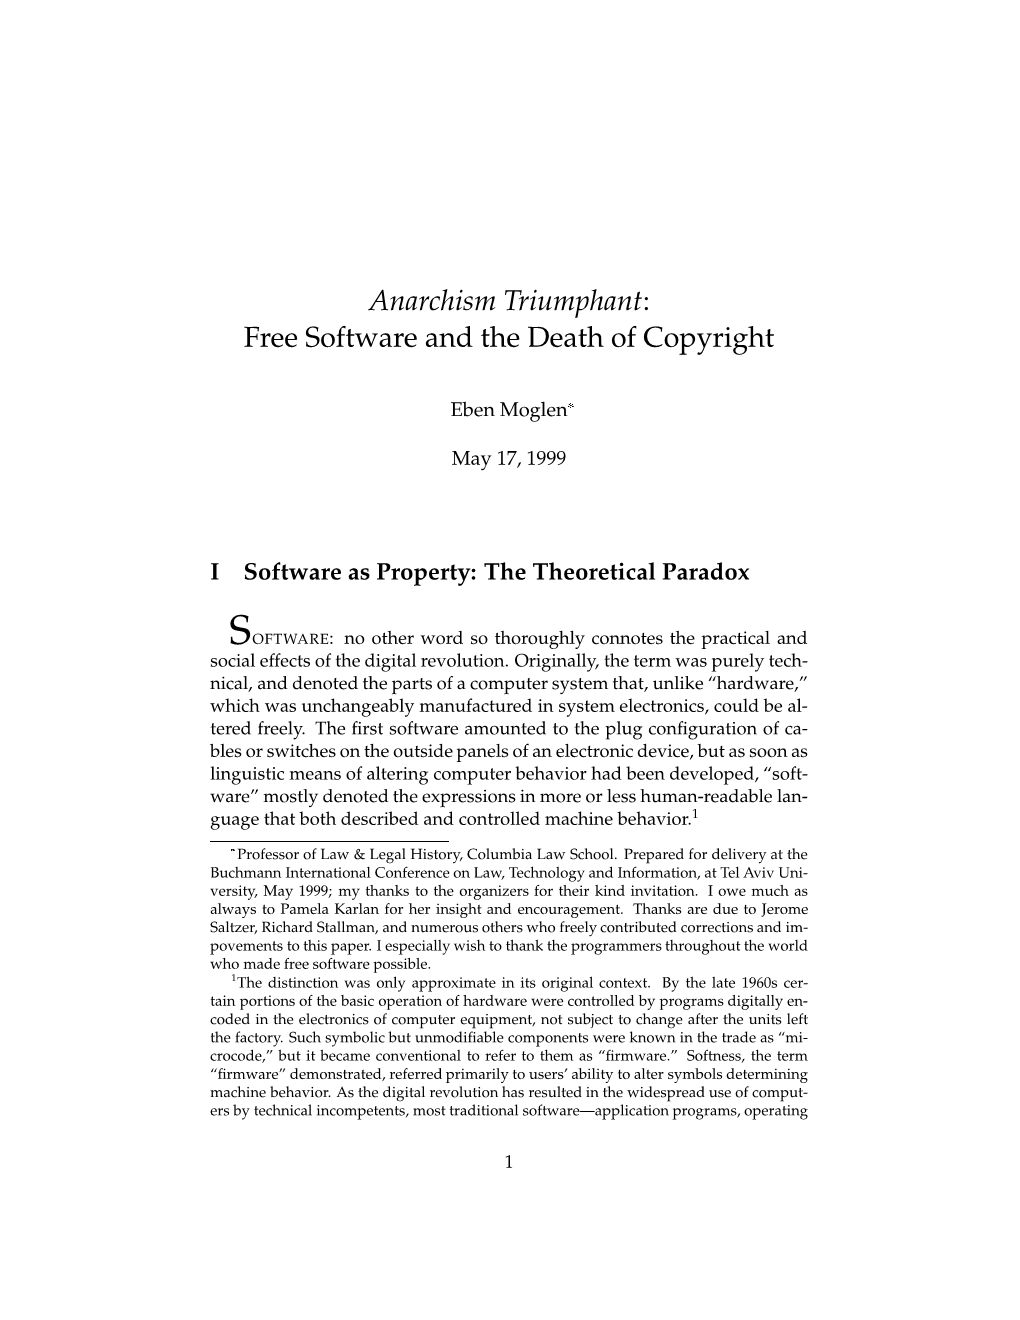 Anarchism Triumphant: Free Software and the Death of Copyright